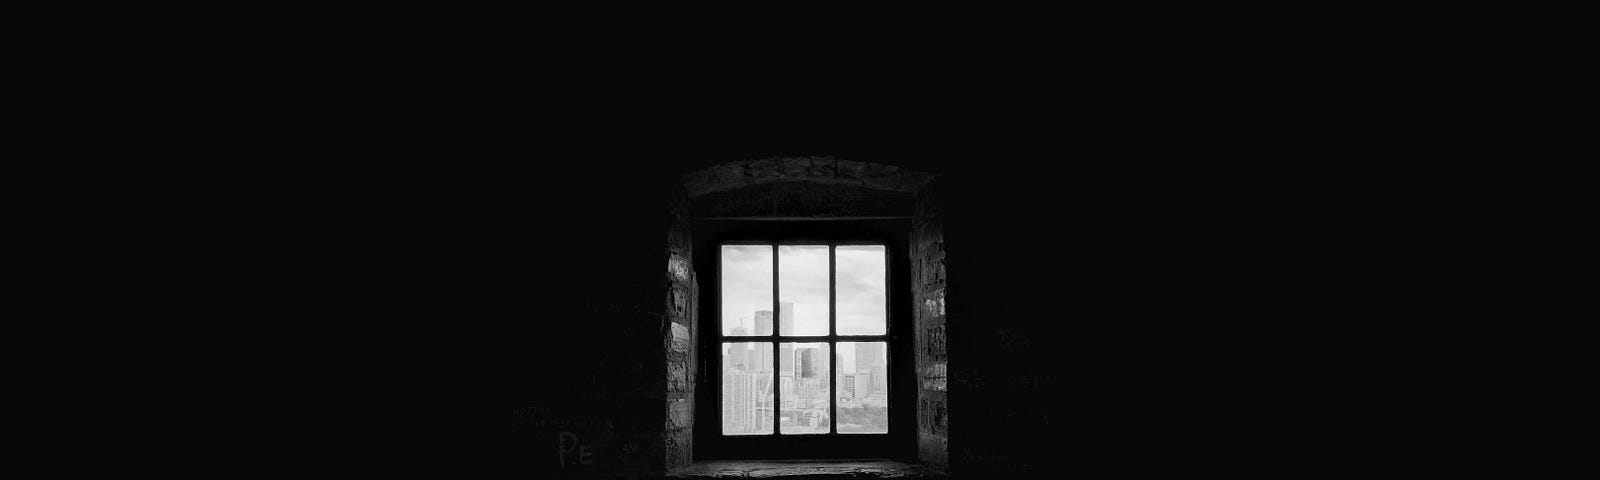 A small six pane window is set within the side of a bricked wall. The room is only partially illuminated within the area of the viewer’s point of view, with the light source being the faint day light outside. This image is used to illuminate the point of this poem’s theme.